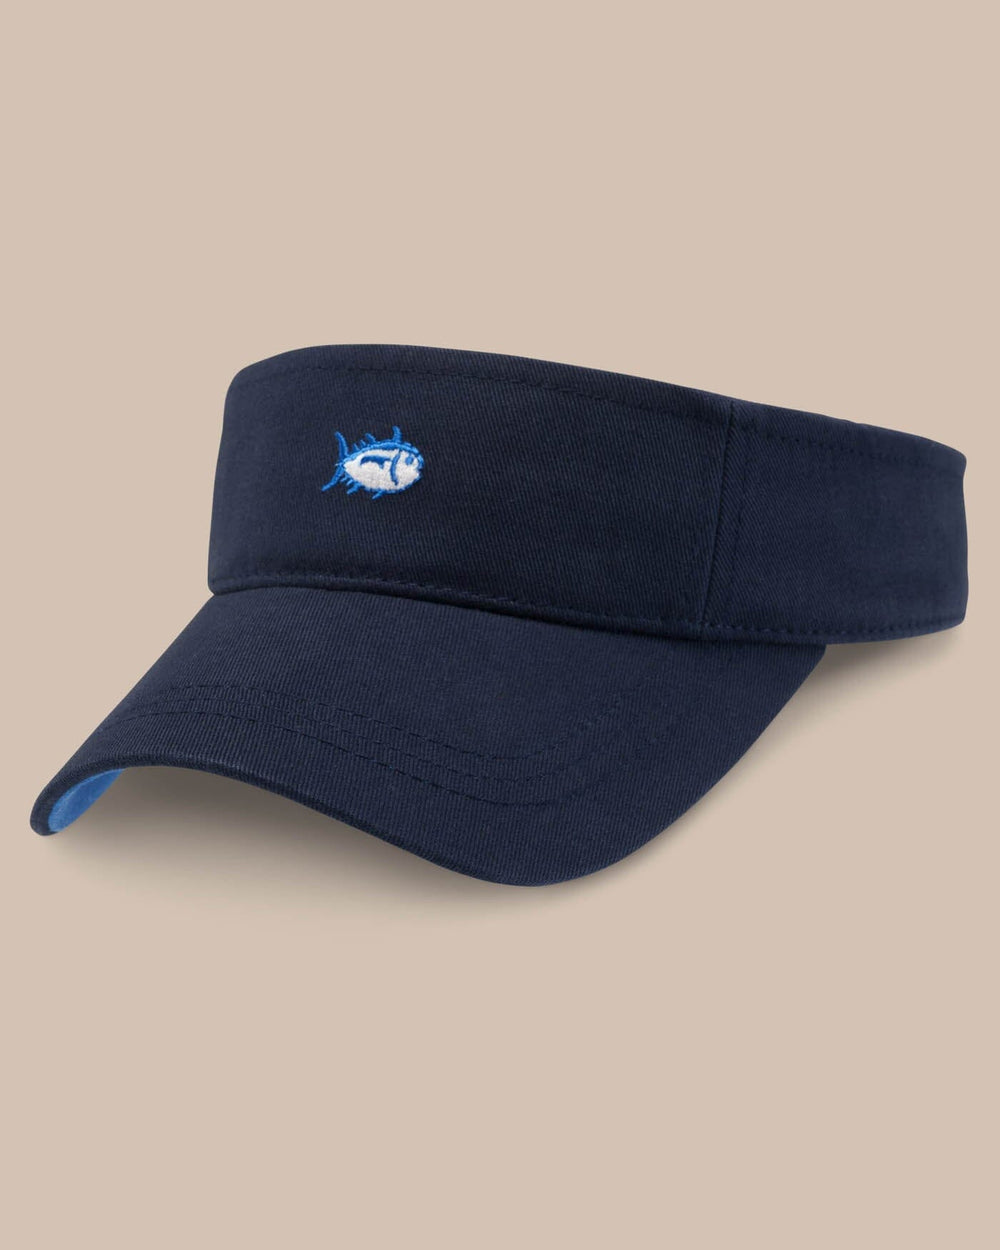 The front view of the Skipjack Visor by Southern Tide - Navy